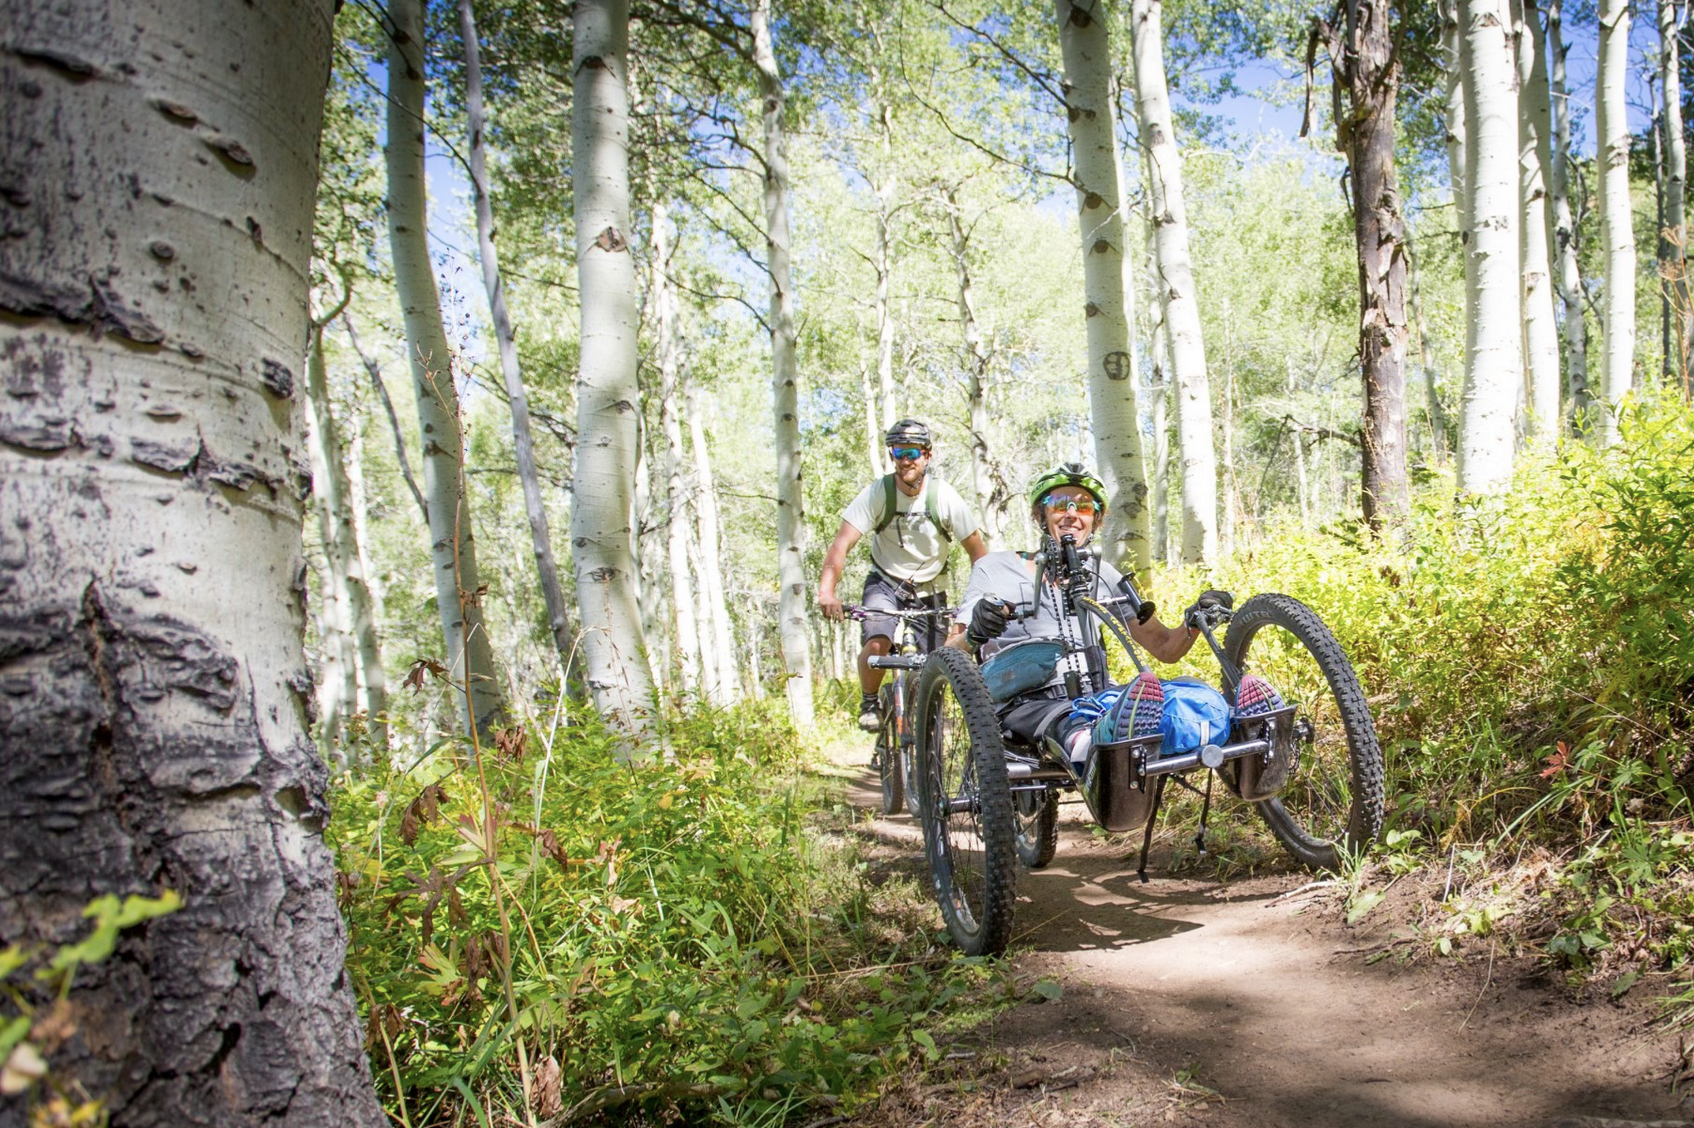 Adaptive-mountain-biking-camp-at-wydaho-rendezvous-festival.png